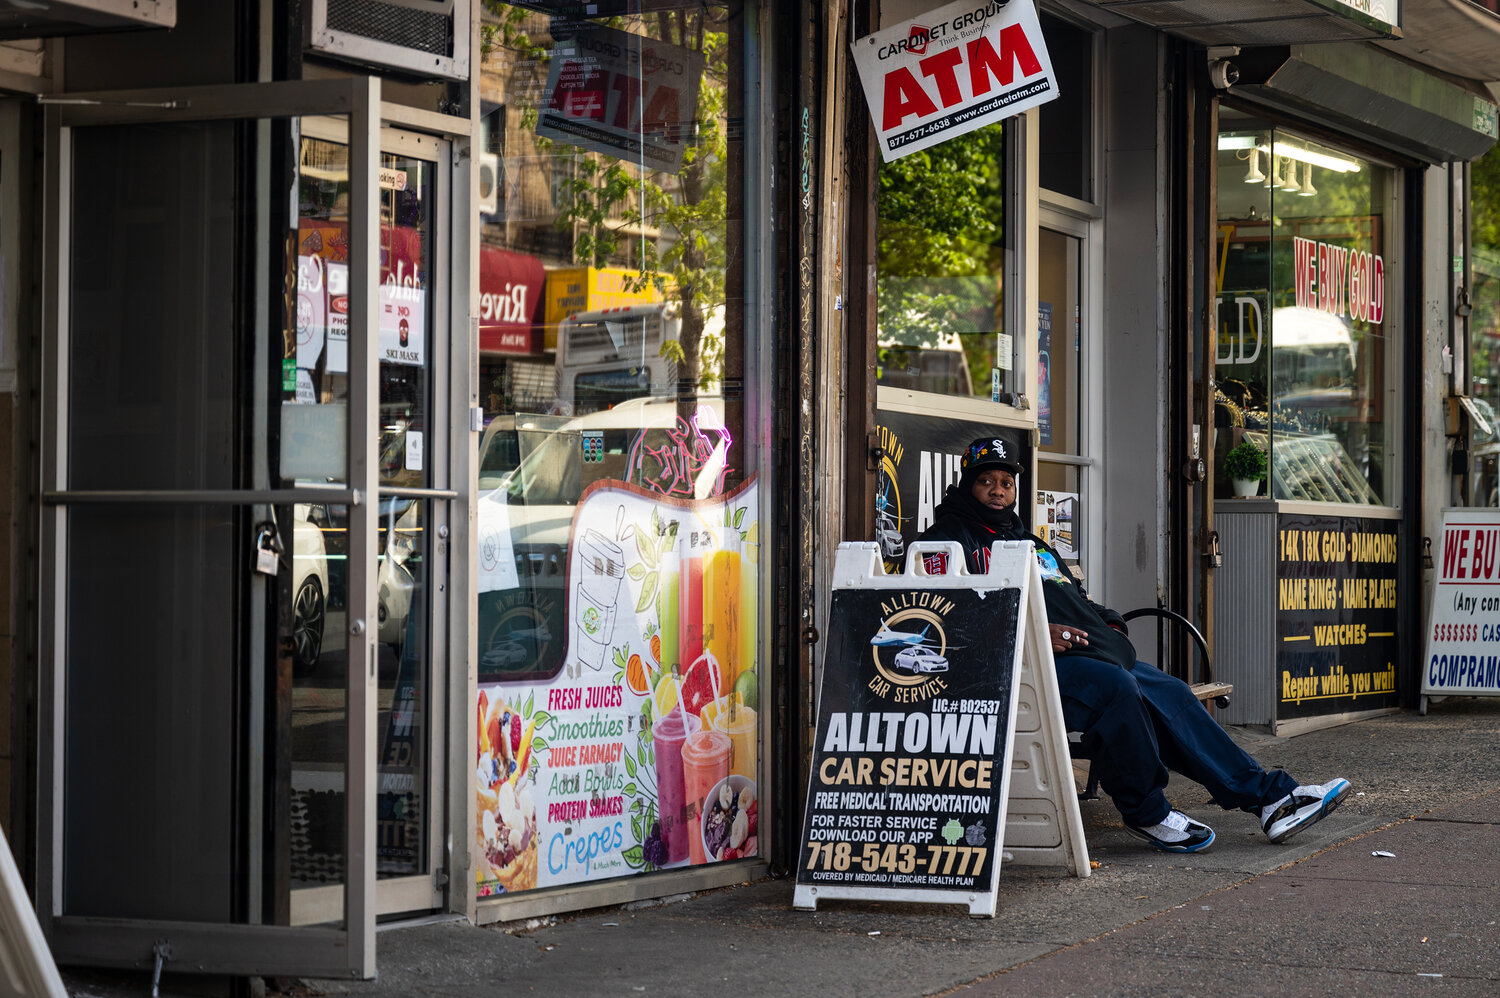 A security guard sits outside of 206 W 231st Street, the smoke shop that was raided, on Wednesday, April 19.